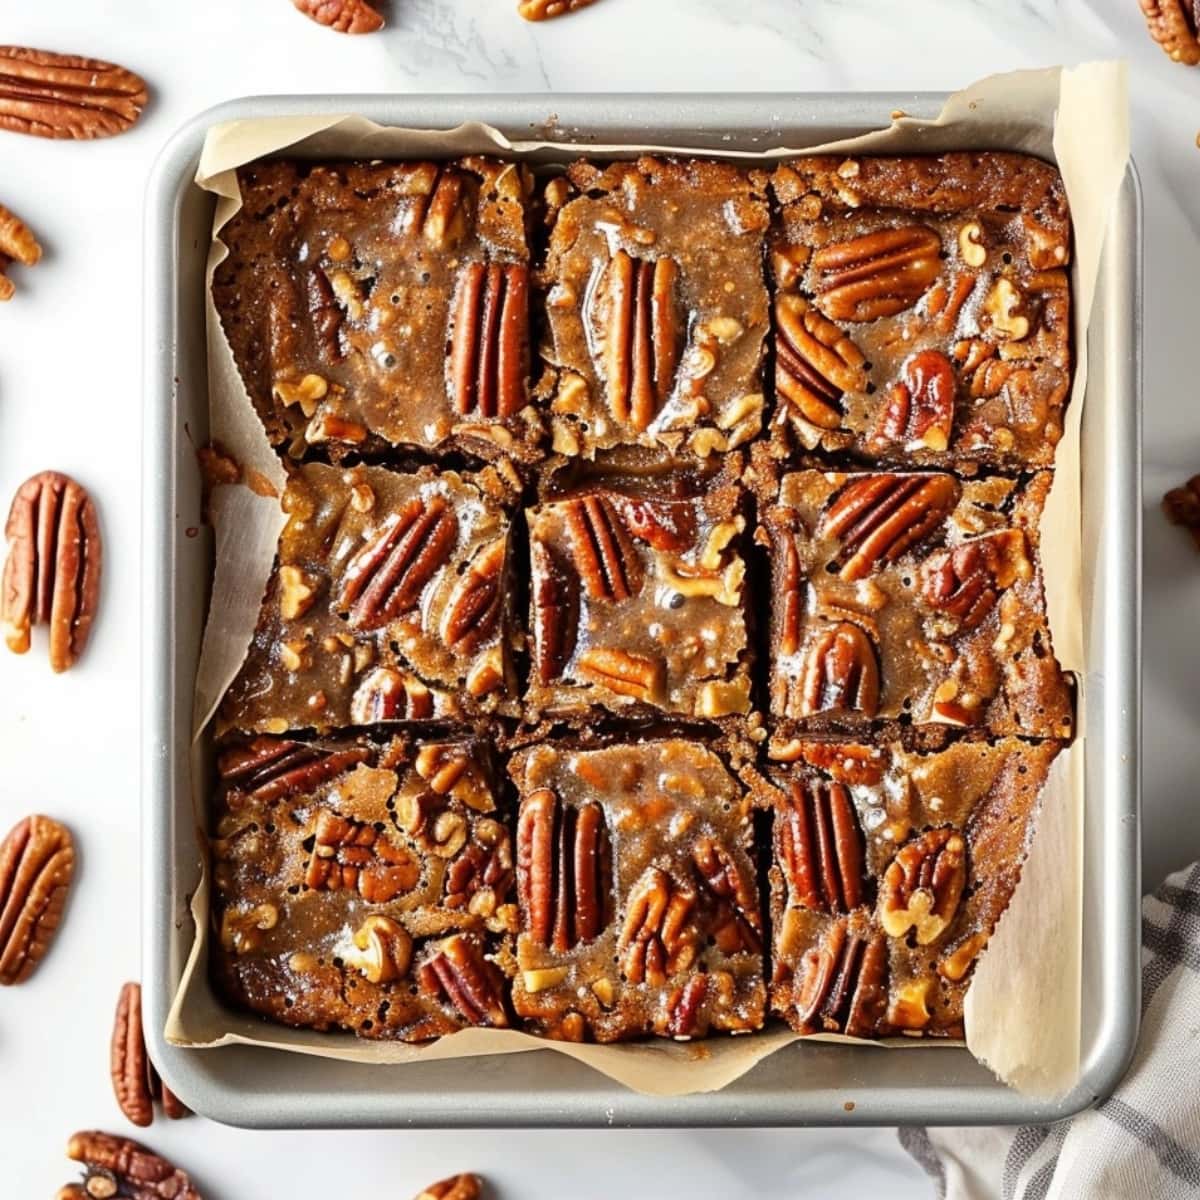 Caramel pecan dream bars sliced in a baking pan with parchment paper.